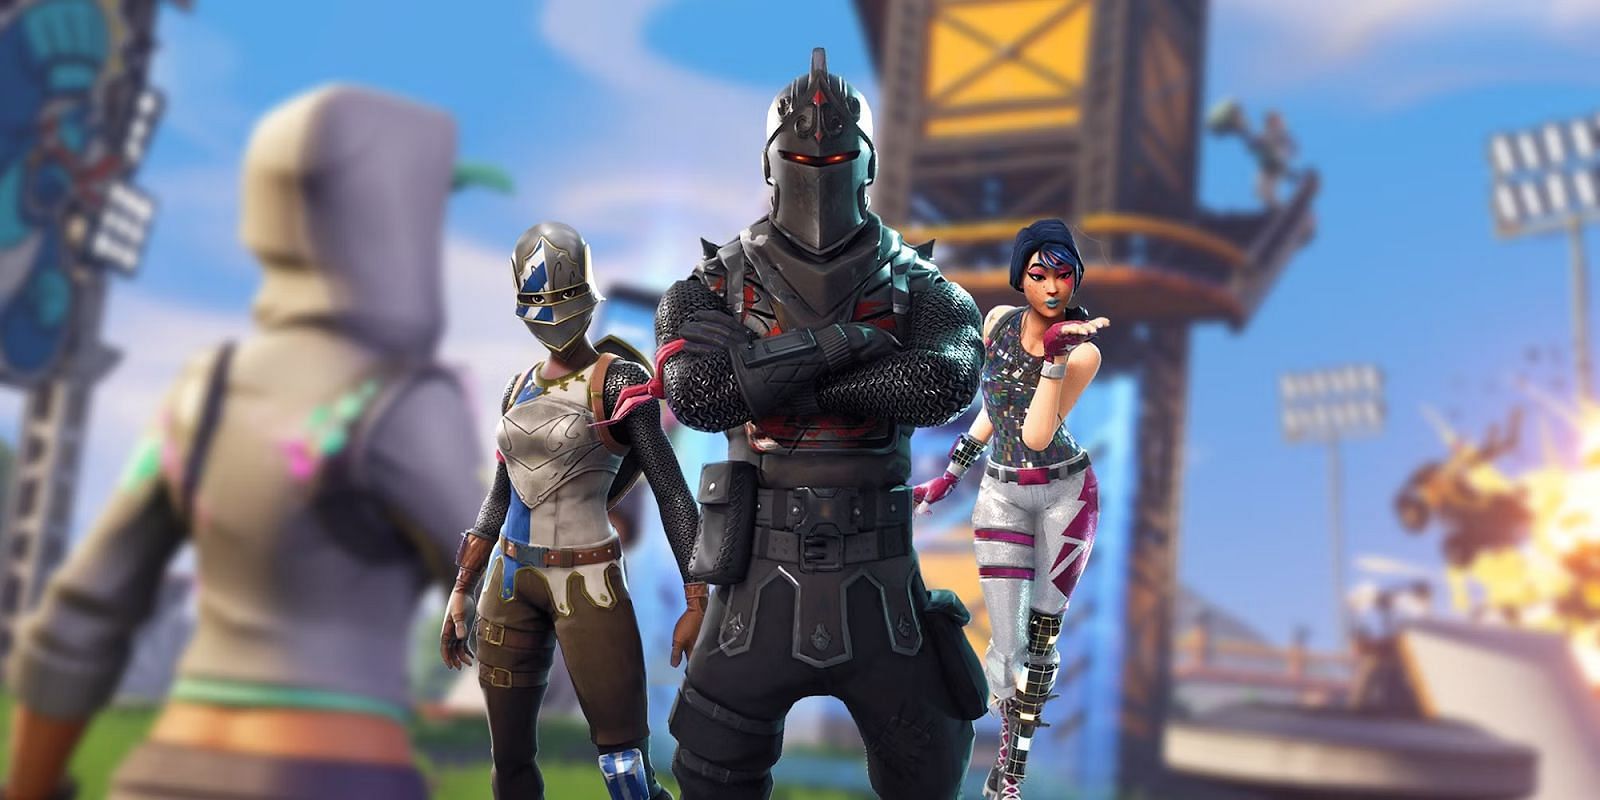 Source: Epic Games